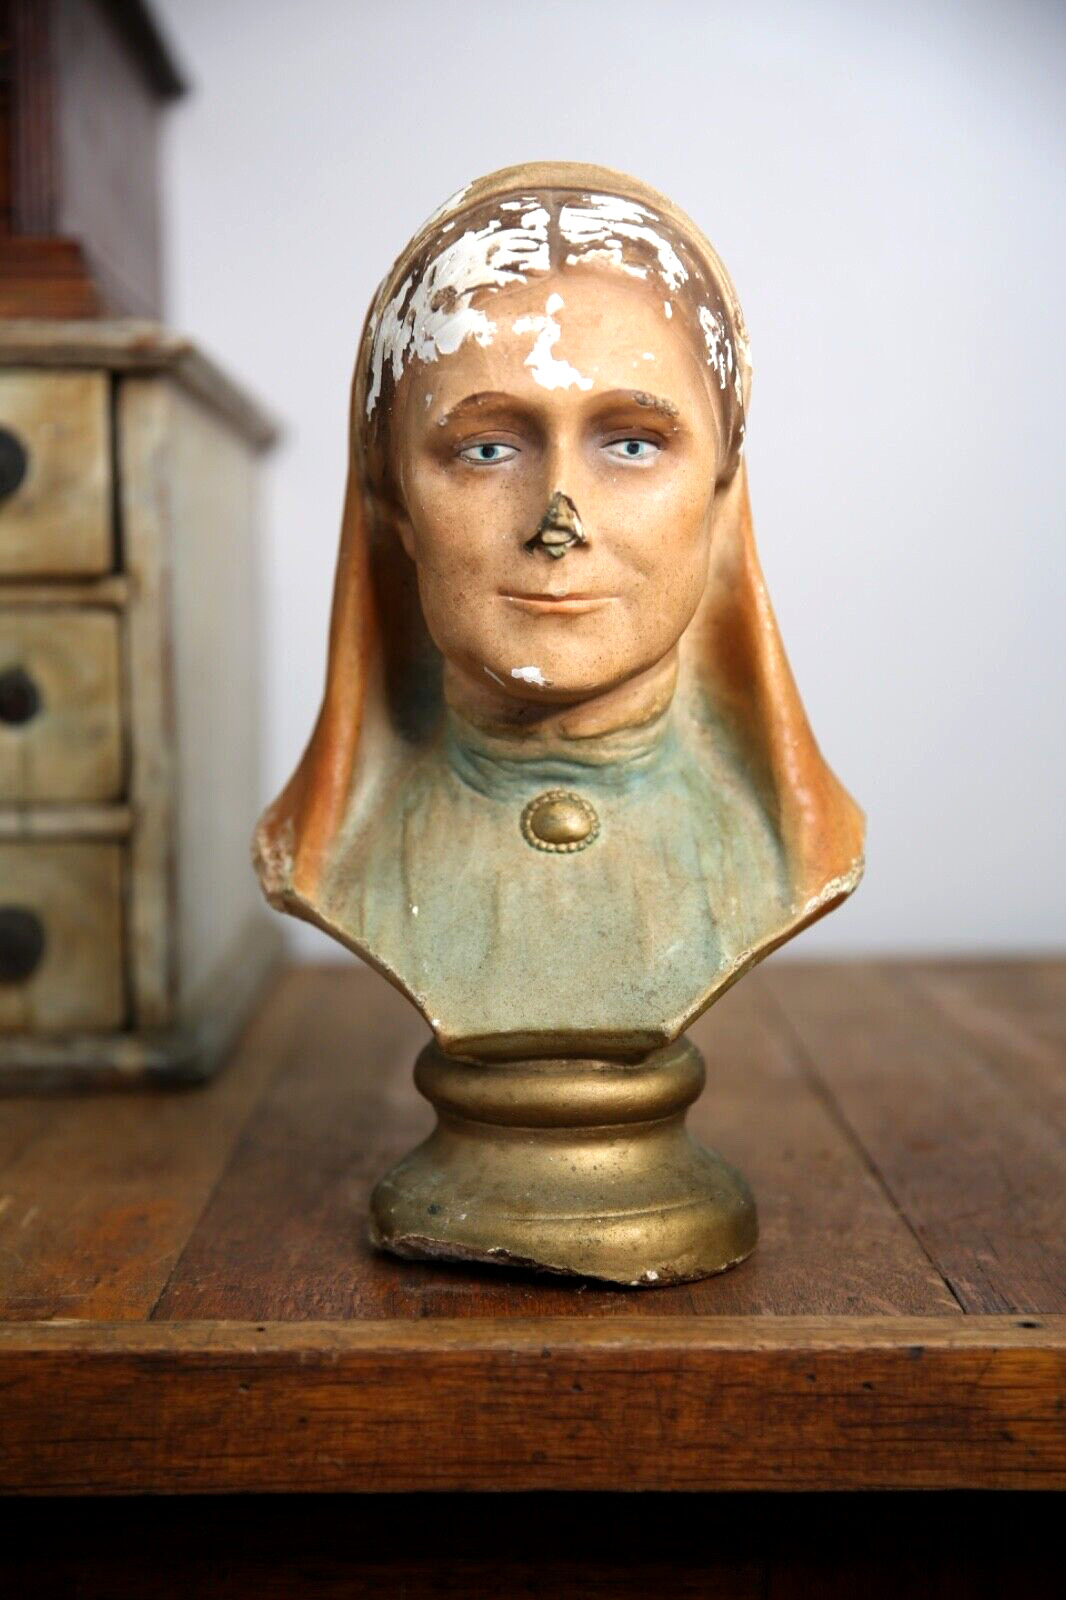 Vintage Antique Woman Chalkware Head Bust Counter Display Religious woman old